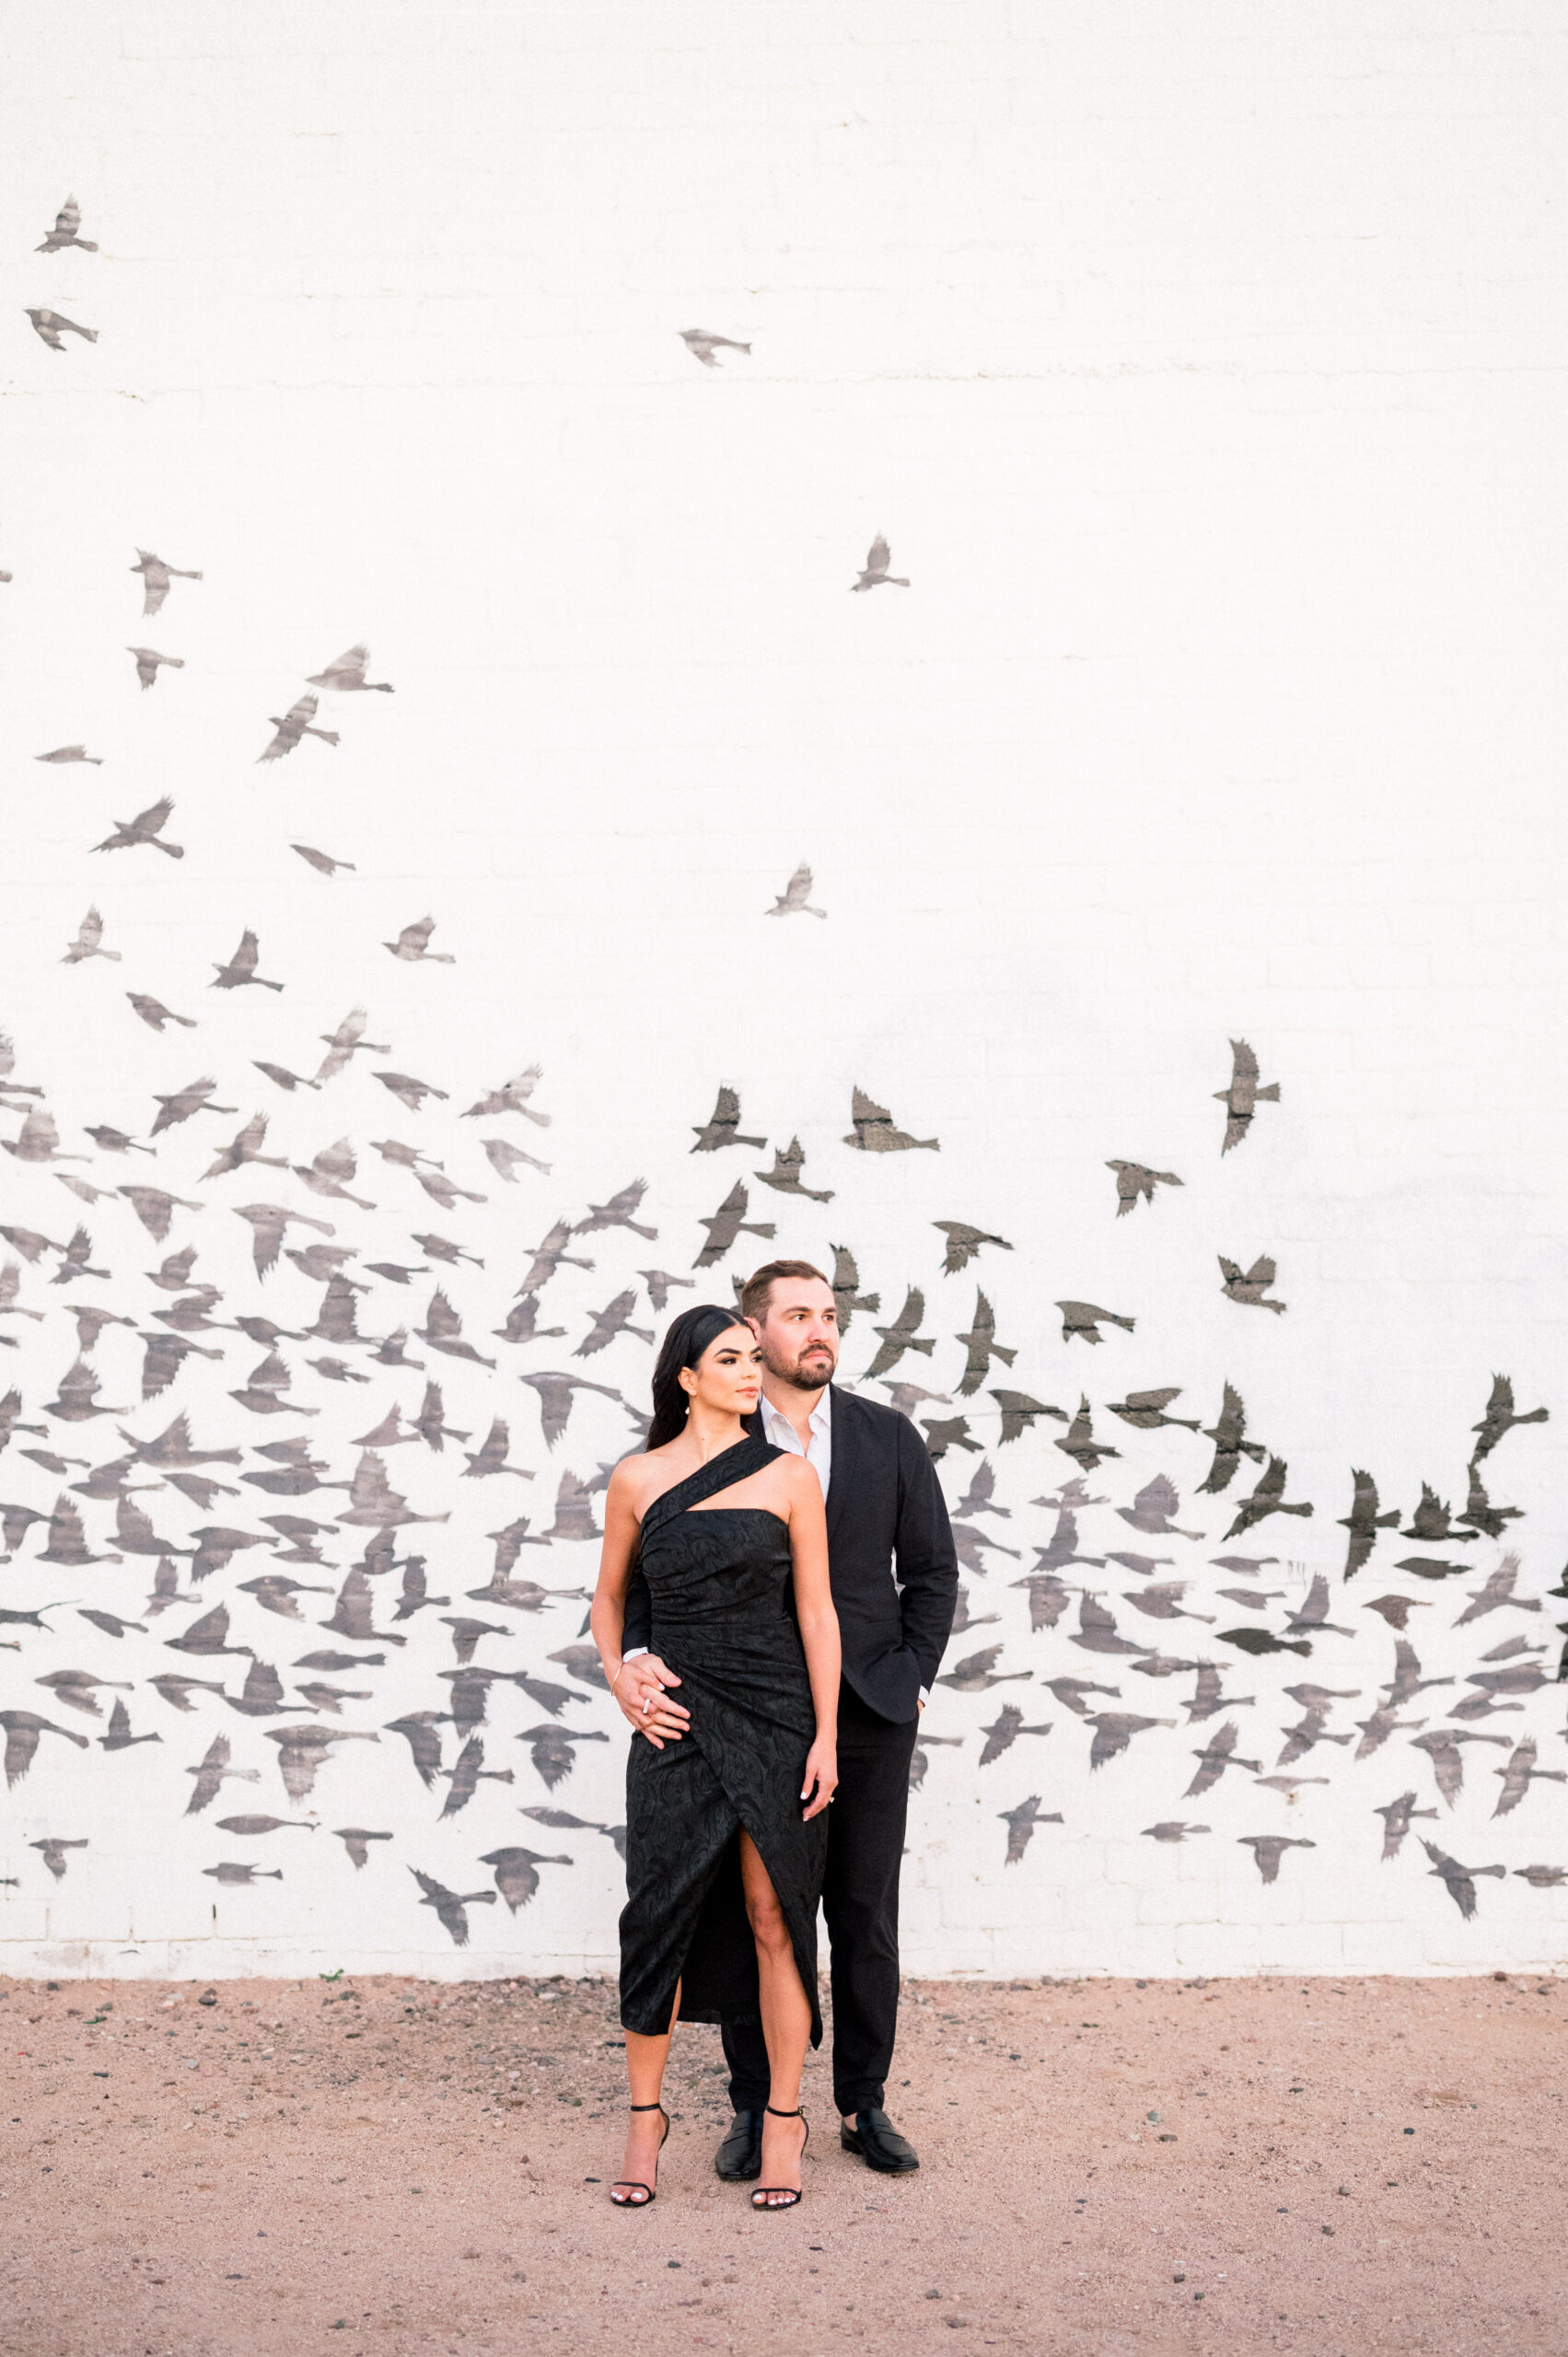 Ivette + Andrews Downtown Phoenix Elopement Reception at the stunning MonOrchid was a party for a lifetime. These two truly have so much love to celebrate!